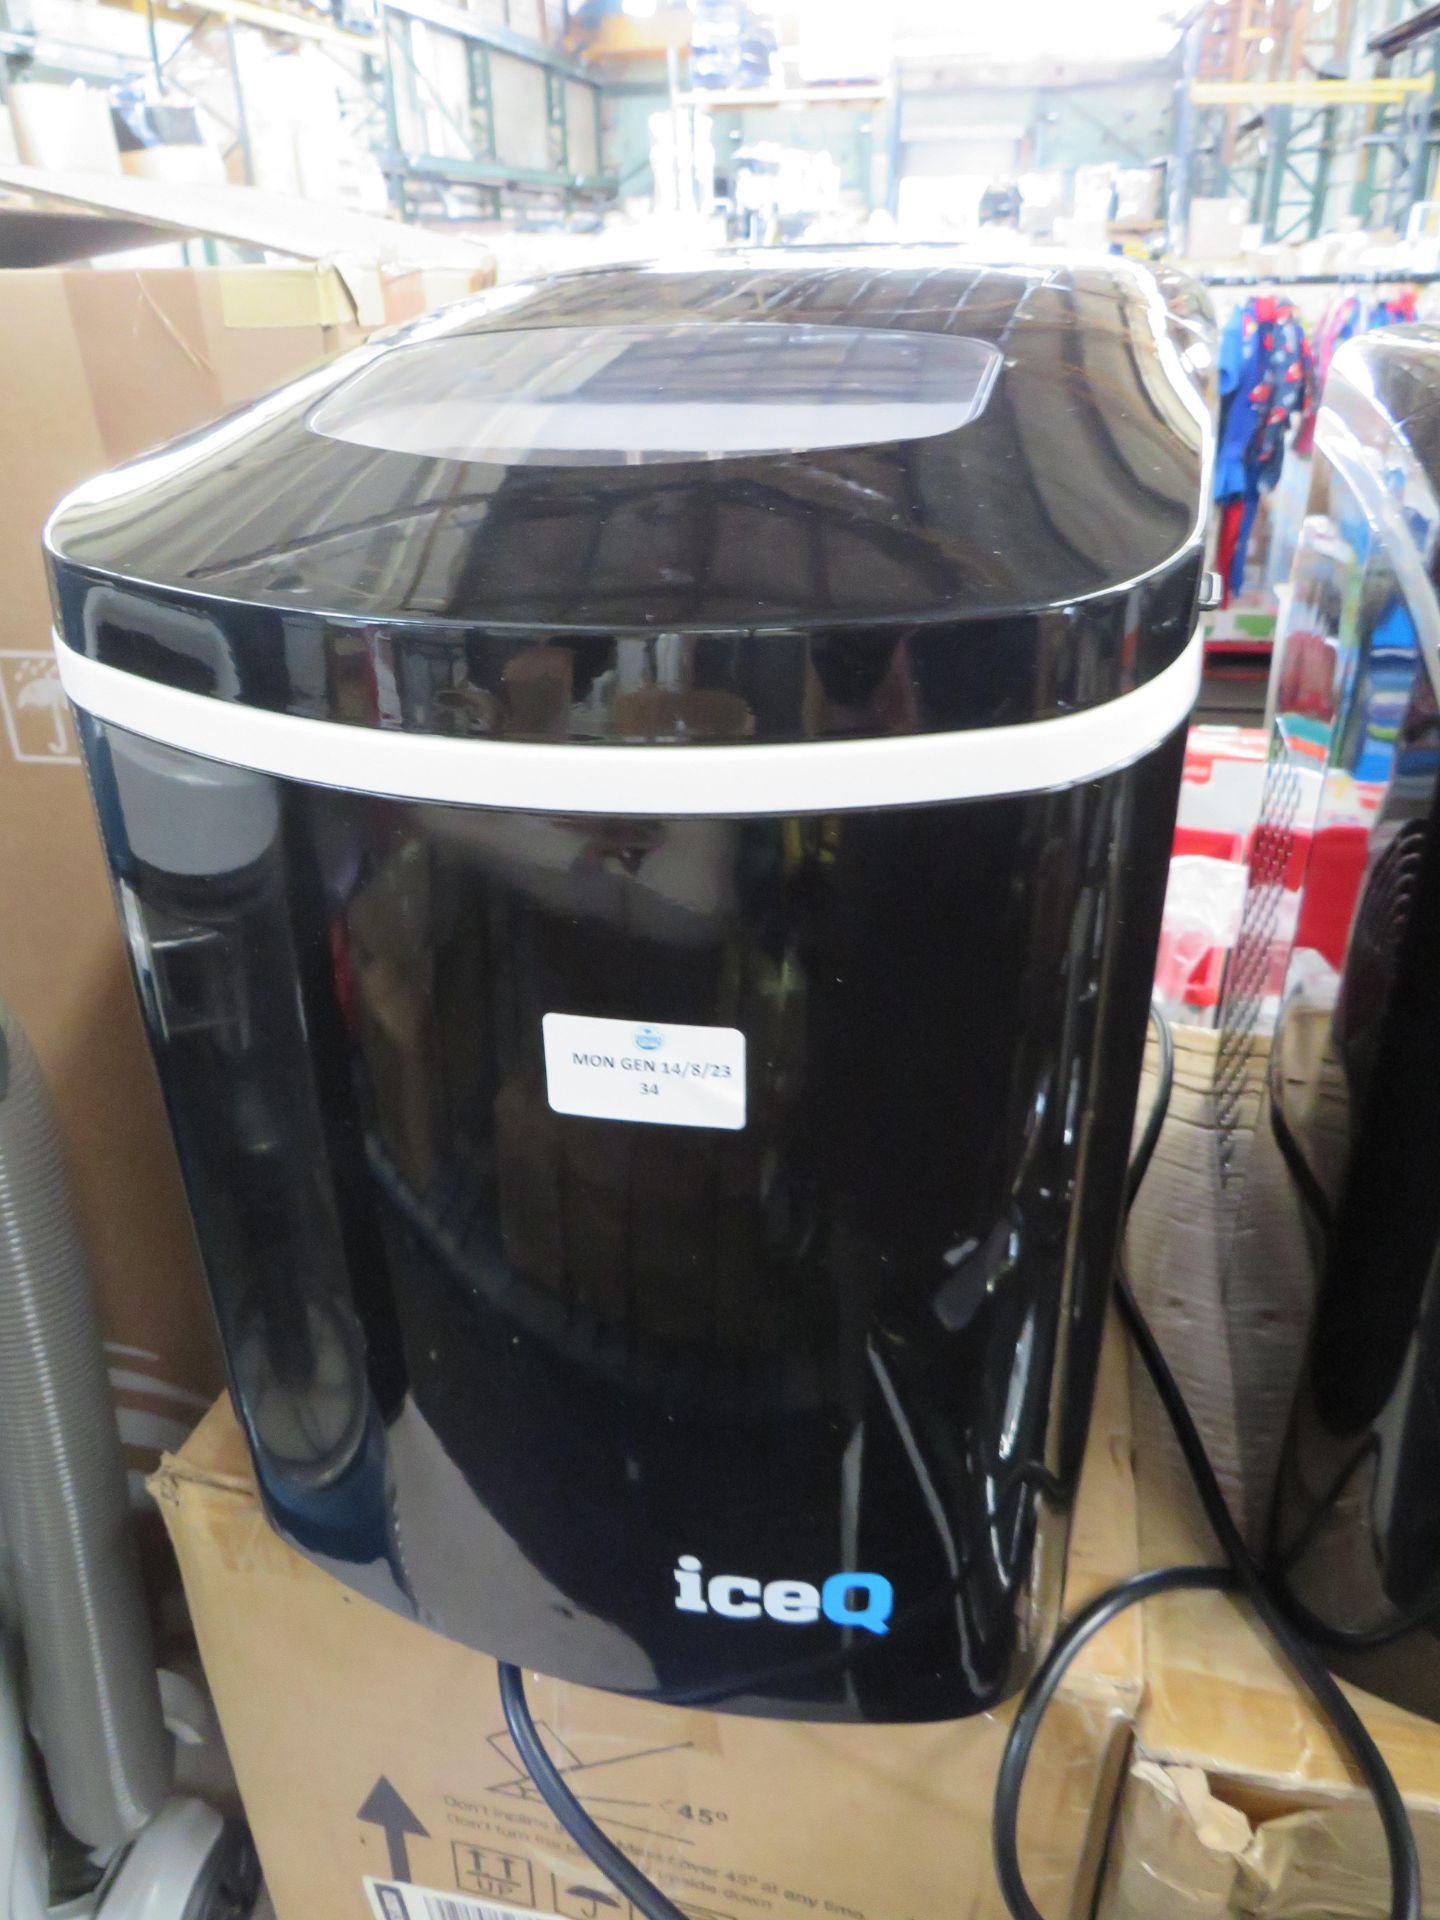 Ice Q compact ice maker, powers on but that is as far as we can test without adding water and